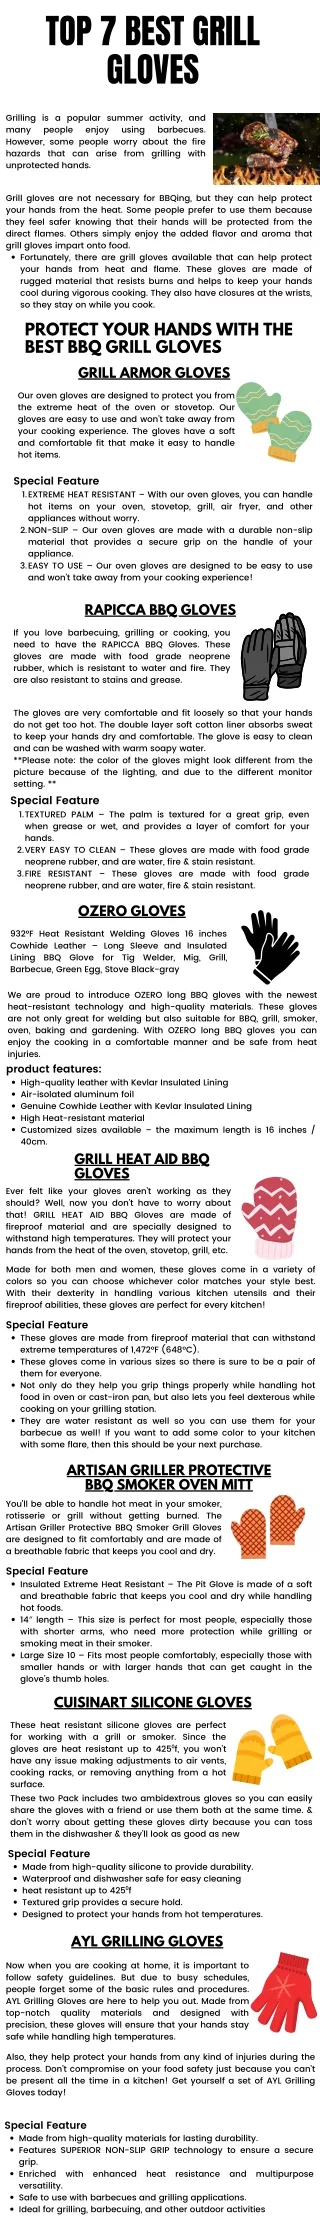 Top 7 Best Grill Gloves